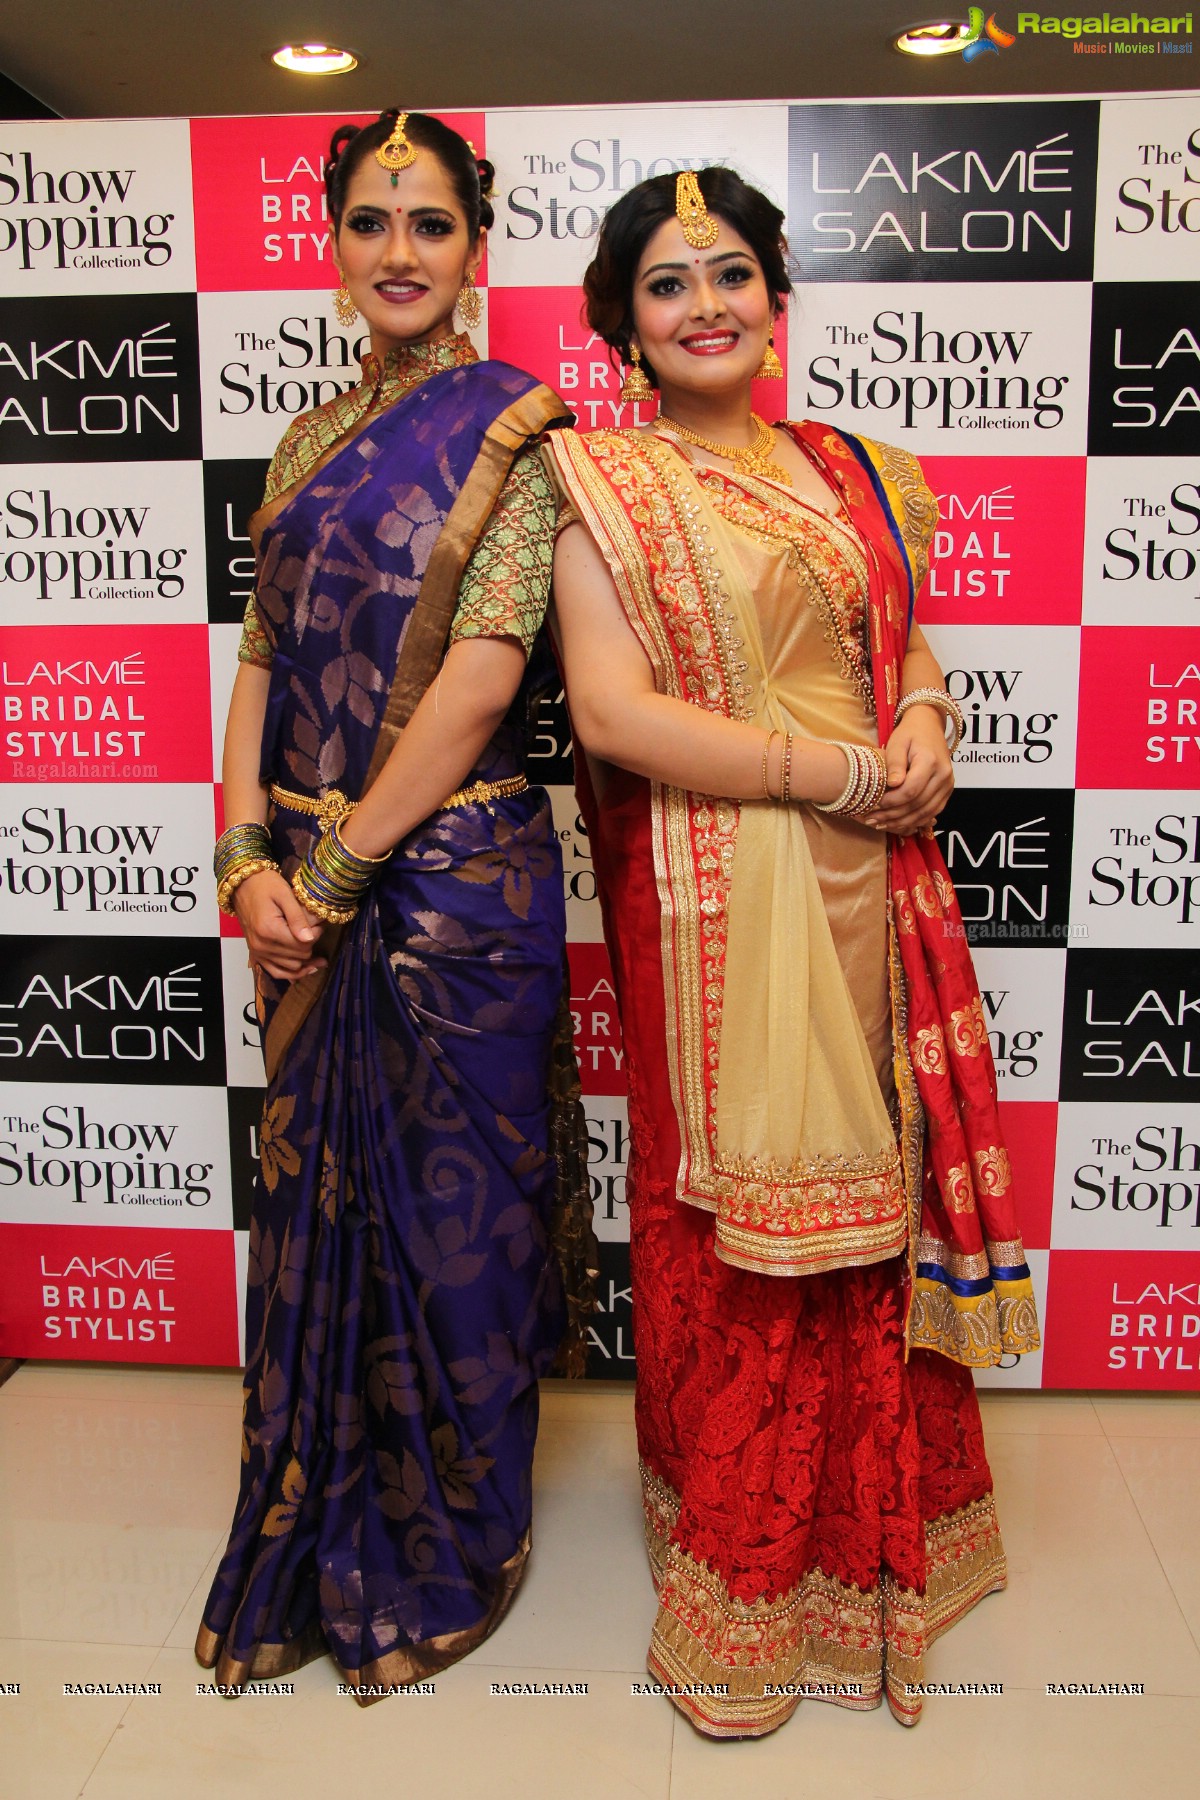 Lakme Bridal Workshop by Bollywood Celebrity Make-up Artist Sushma Khan at Aaltos A And M Trade Center, Hyderabad